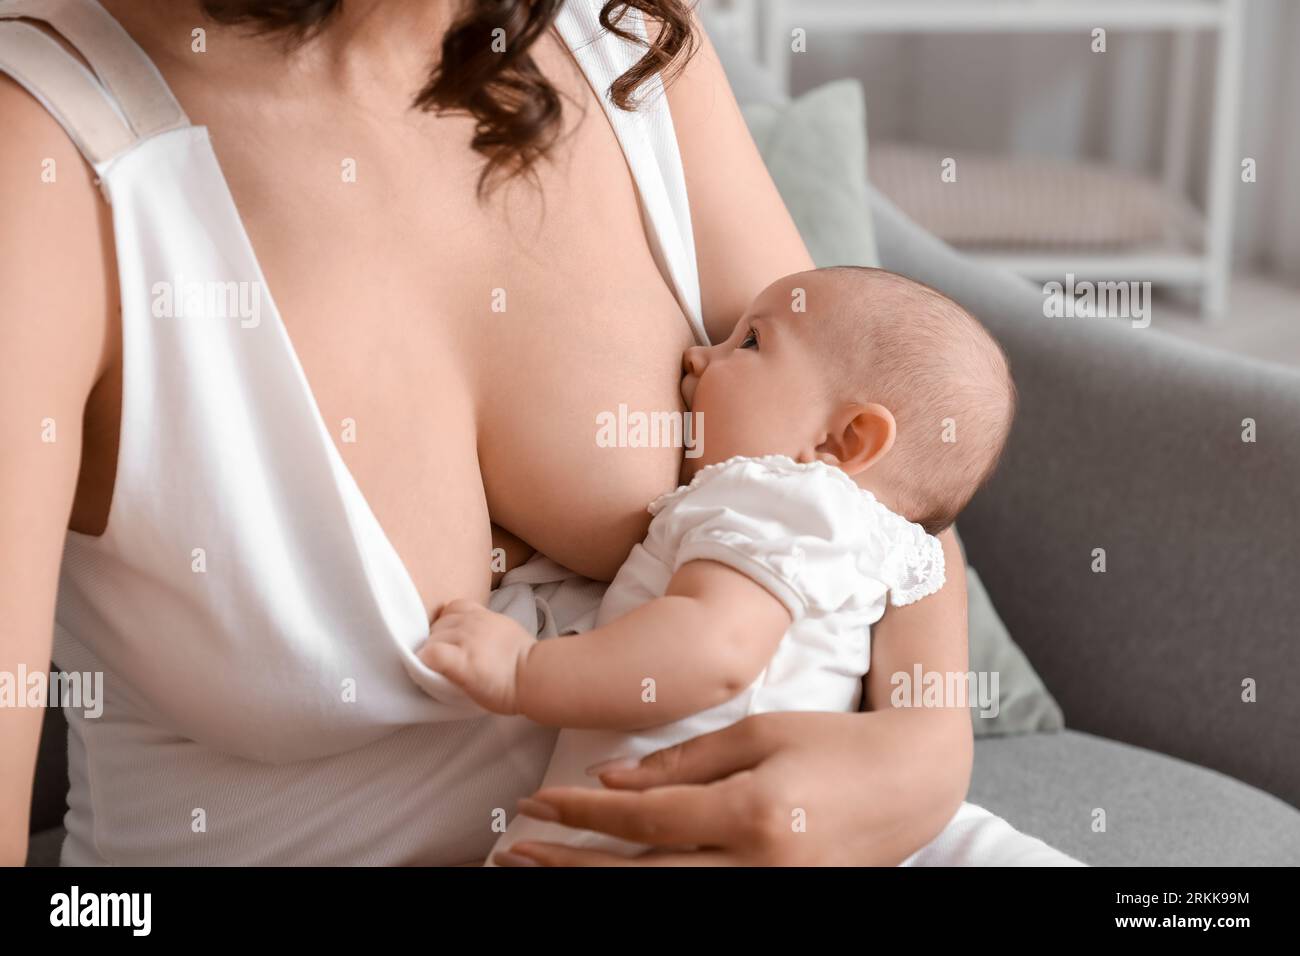 Young woman breastfeeding her baby at home, closeup Stock Photo